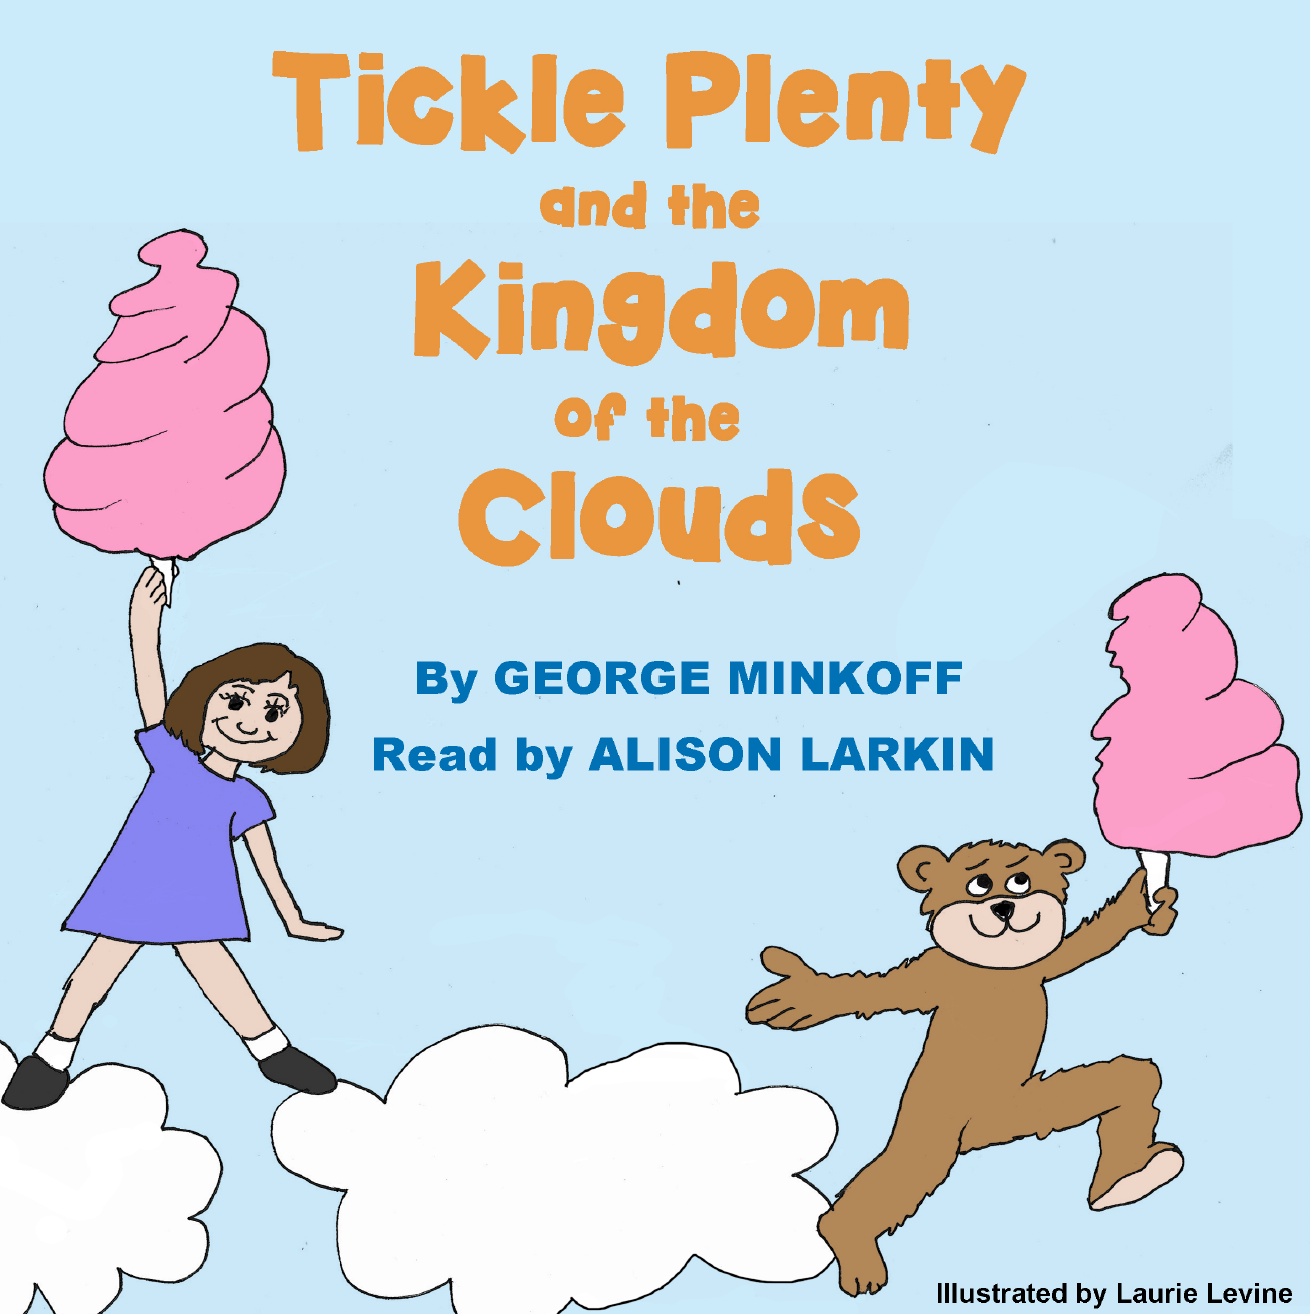 Tickle Plenty and the Kingdom of the Clouds, by George Minkoff. Read by Alison Larkin. Illustrated by Laurie Levine.